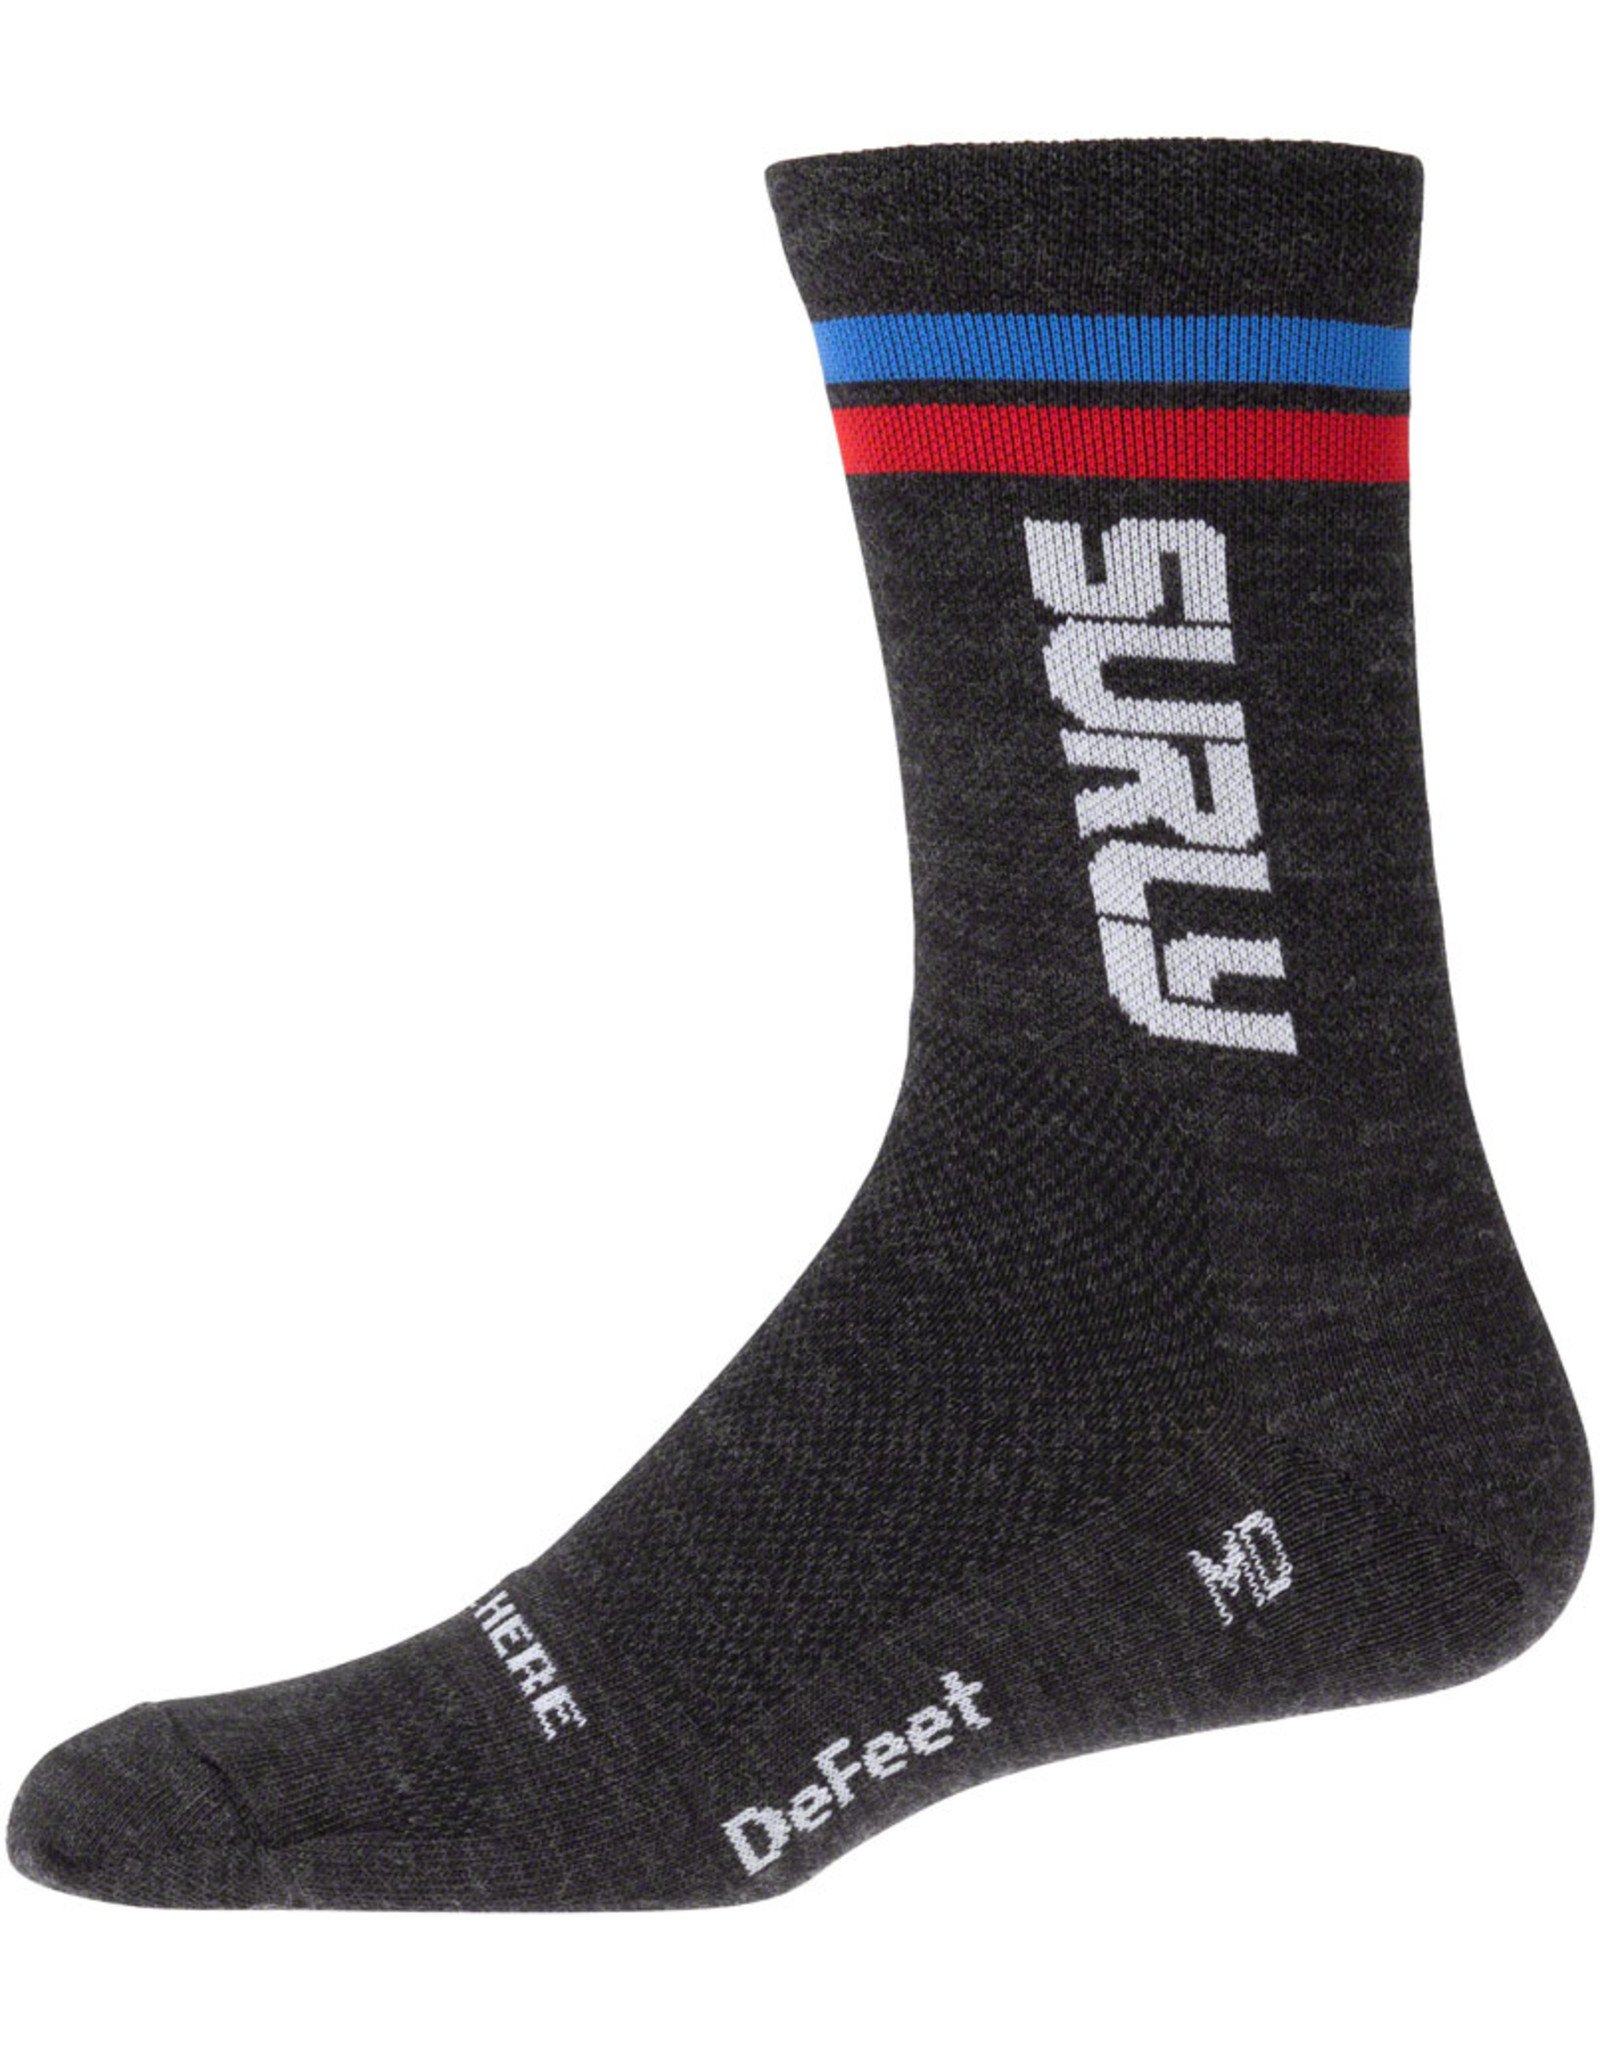 Surly Surly Intergalactic Bicycle Company Wool Sock - Black/Red/Blue